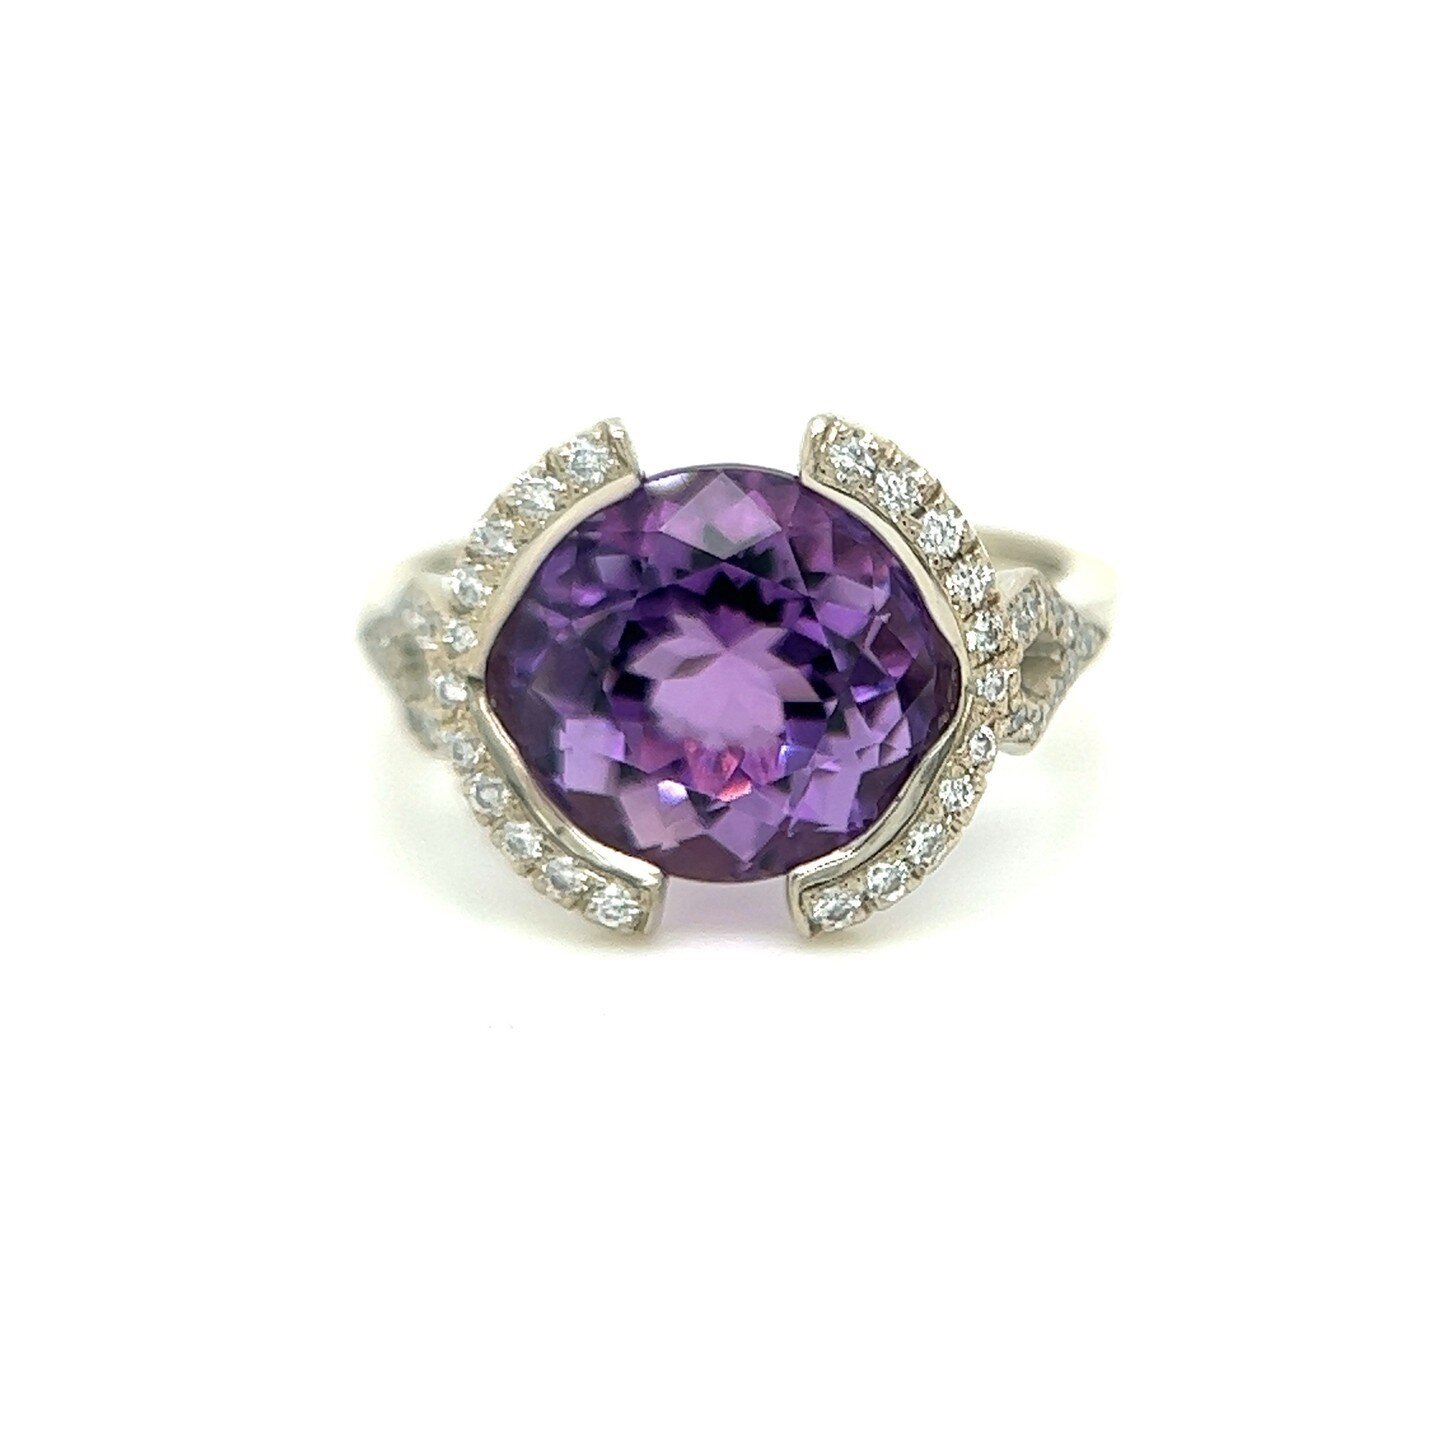 Look at this. Just look at it. Did you ever see such a pretty amethyst ring? Maybe you need to come in to see it and let us know. ⁠
⁠
😏⁠
⁠
⁠
#restoration #fashion #jewelrydesign #gold #customjewelry #outfit #jewelrymaking #fun #crystals #musthave #j